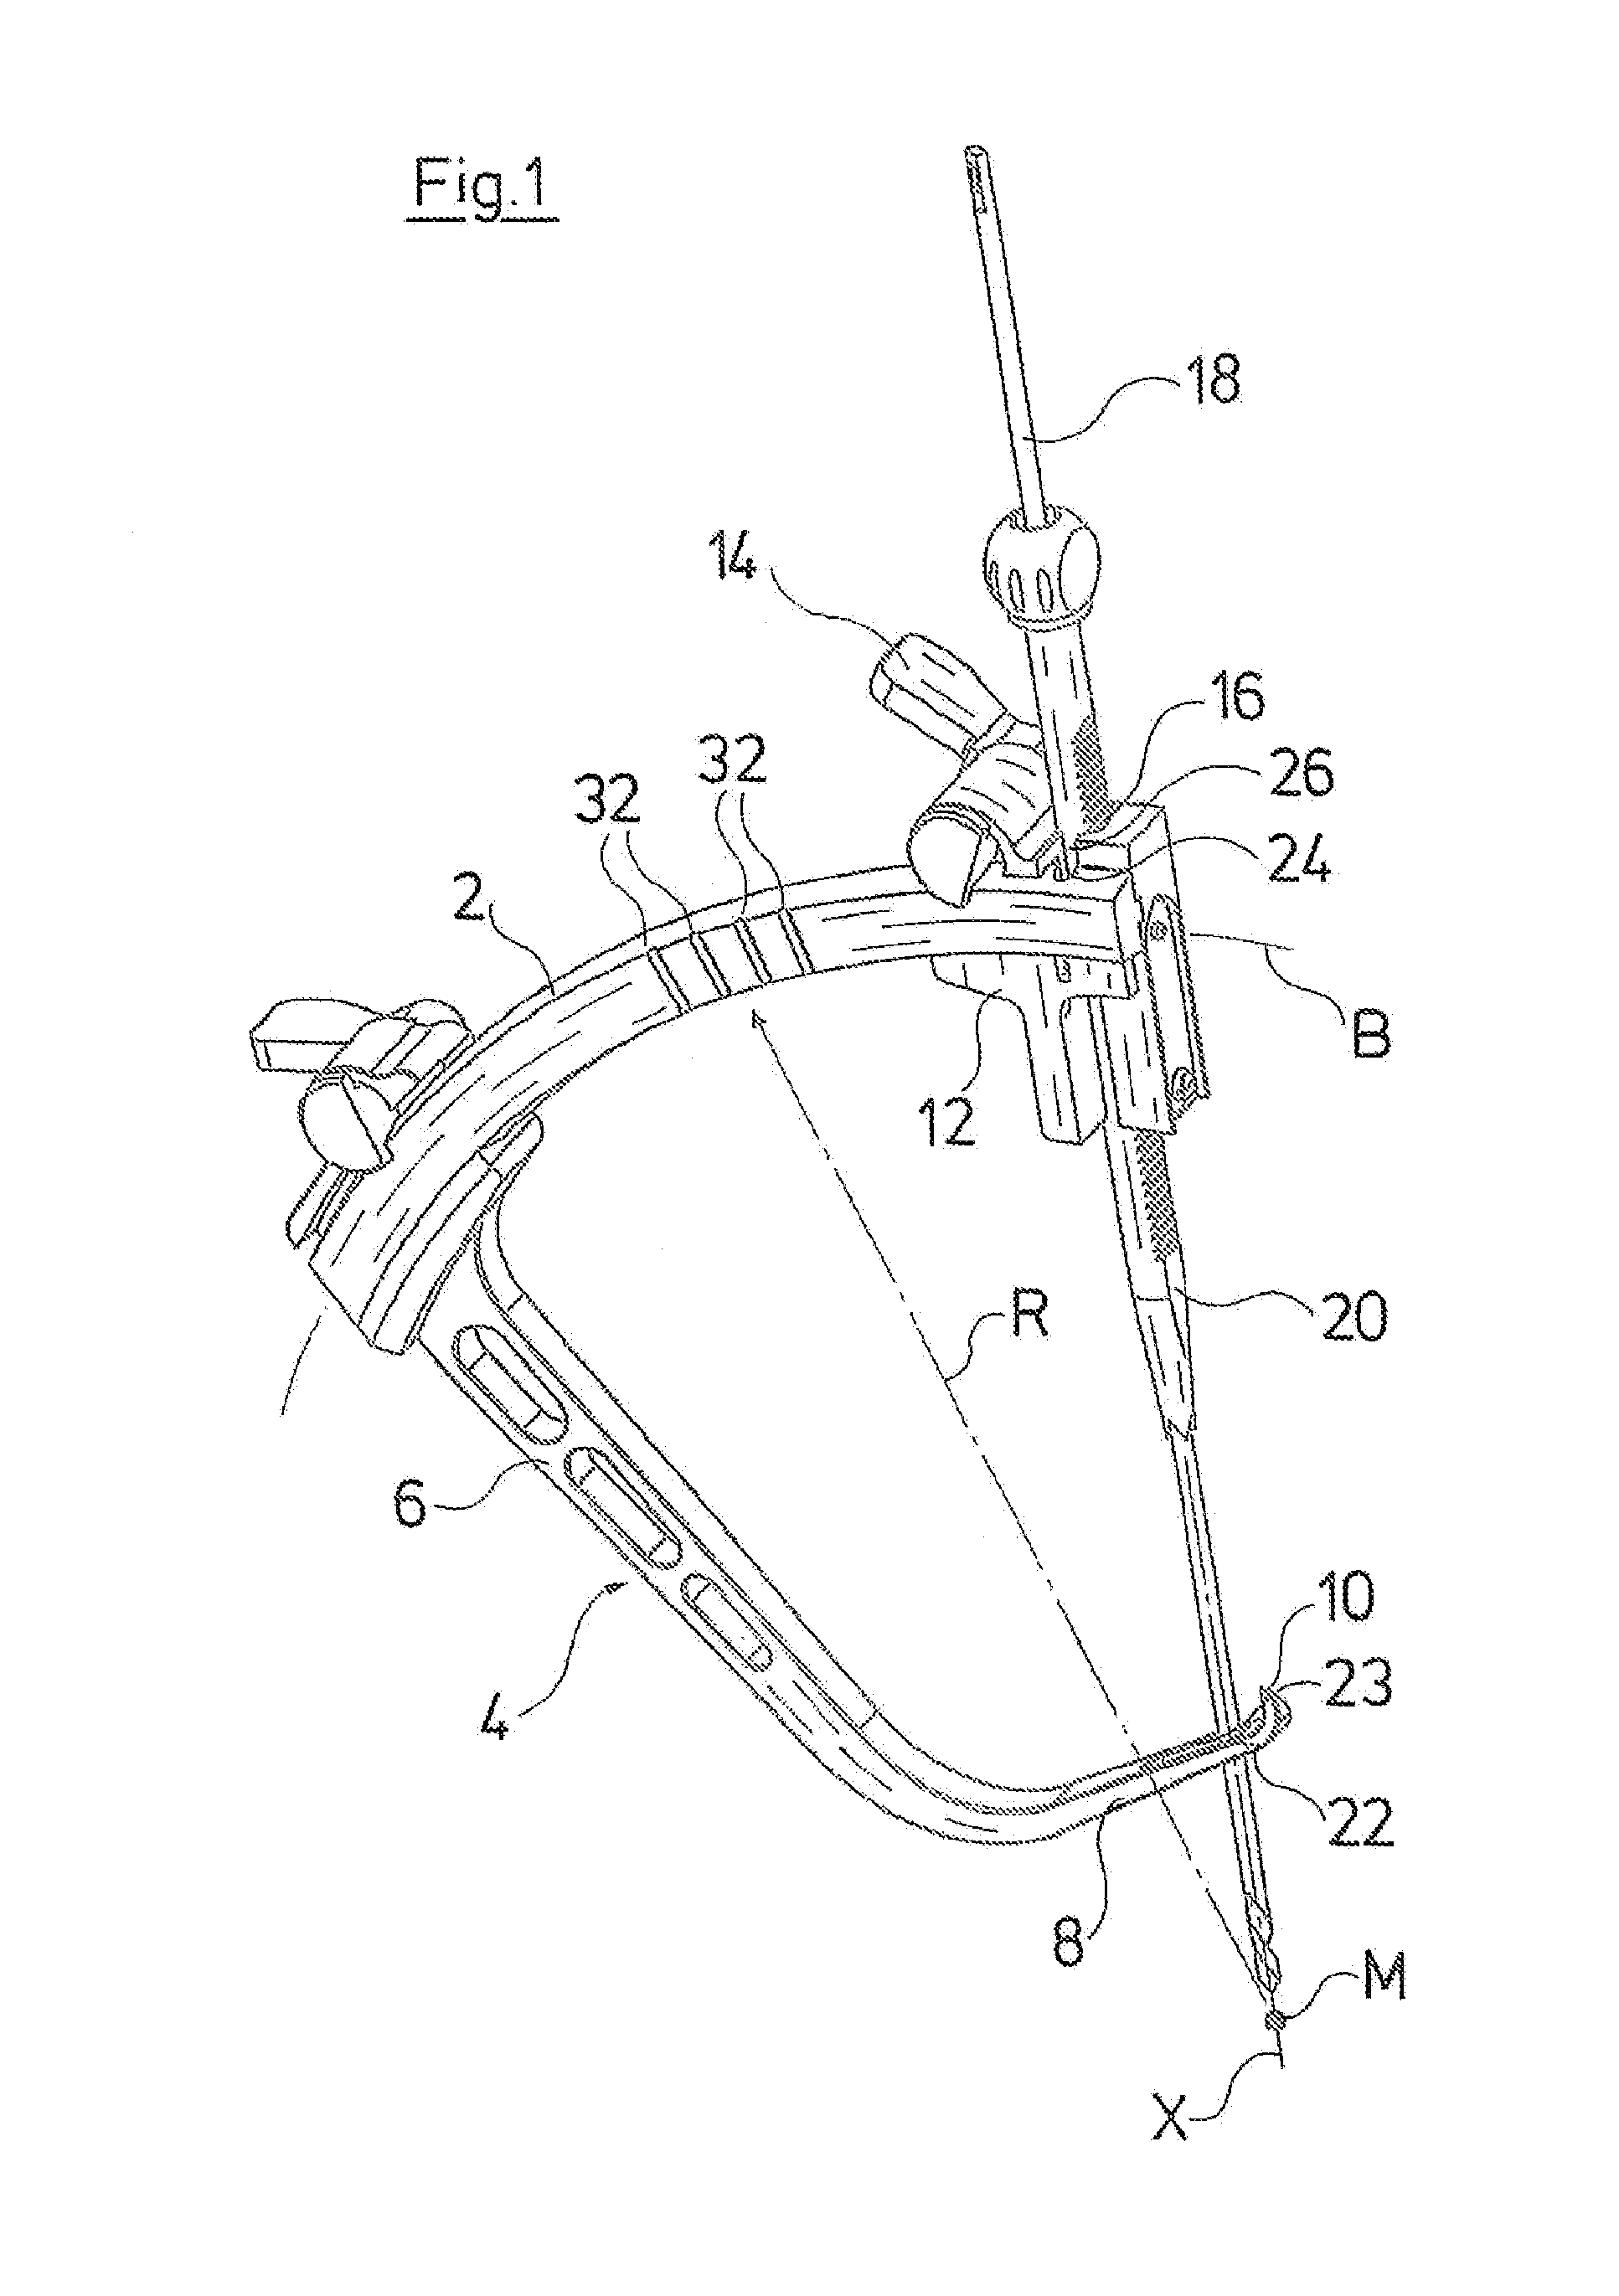 Surgical guiding device for reconstruction of anterior cruciate ligament